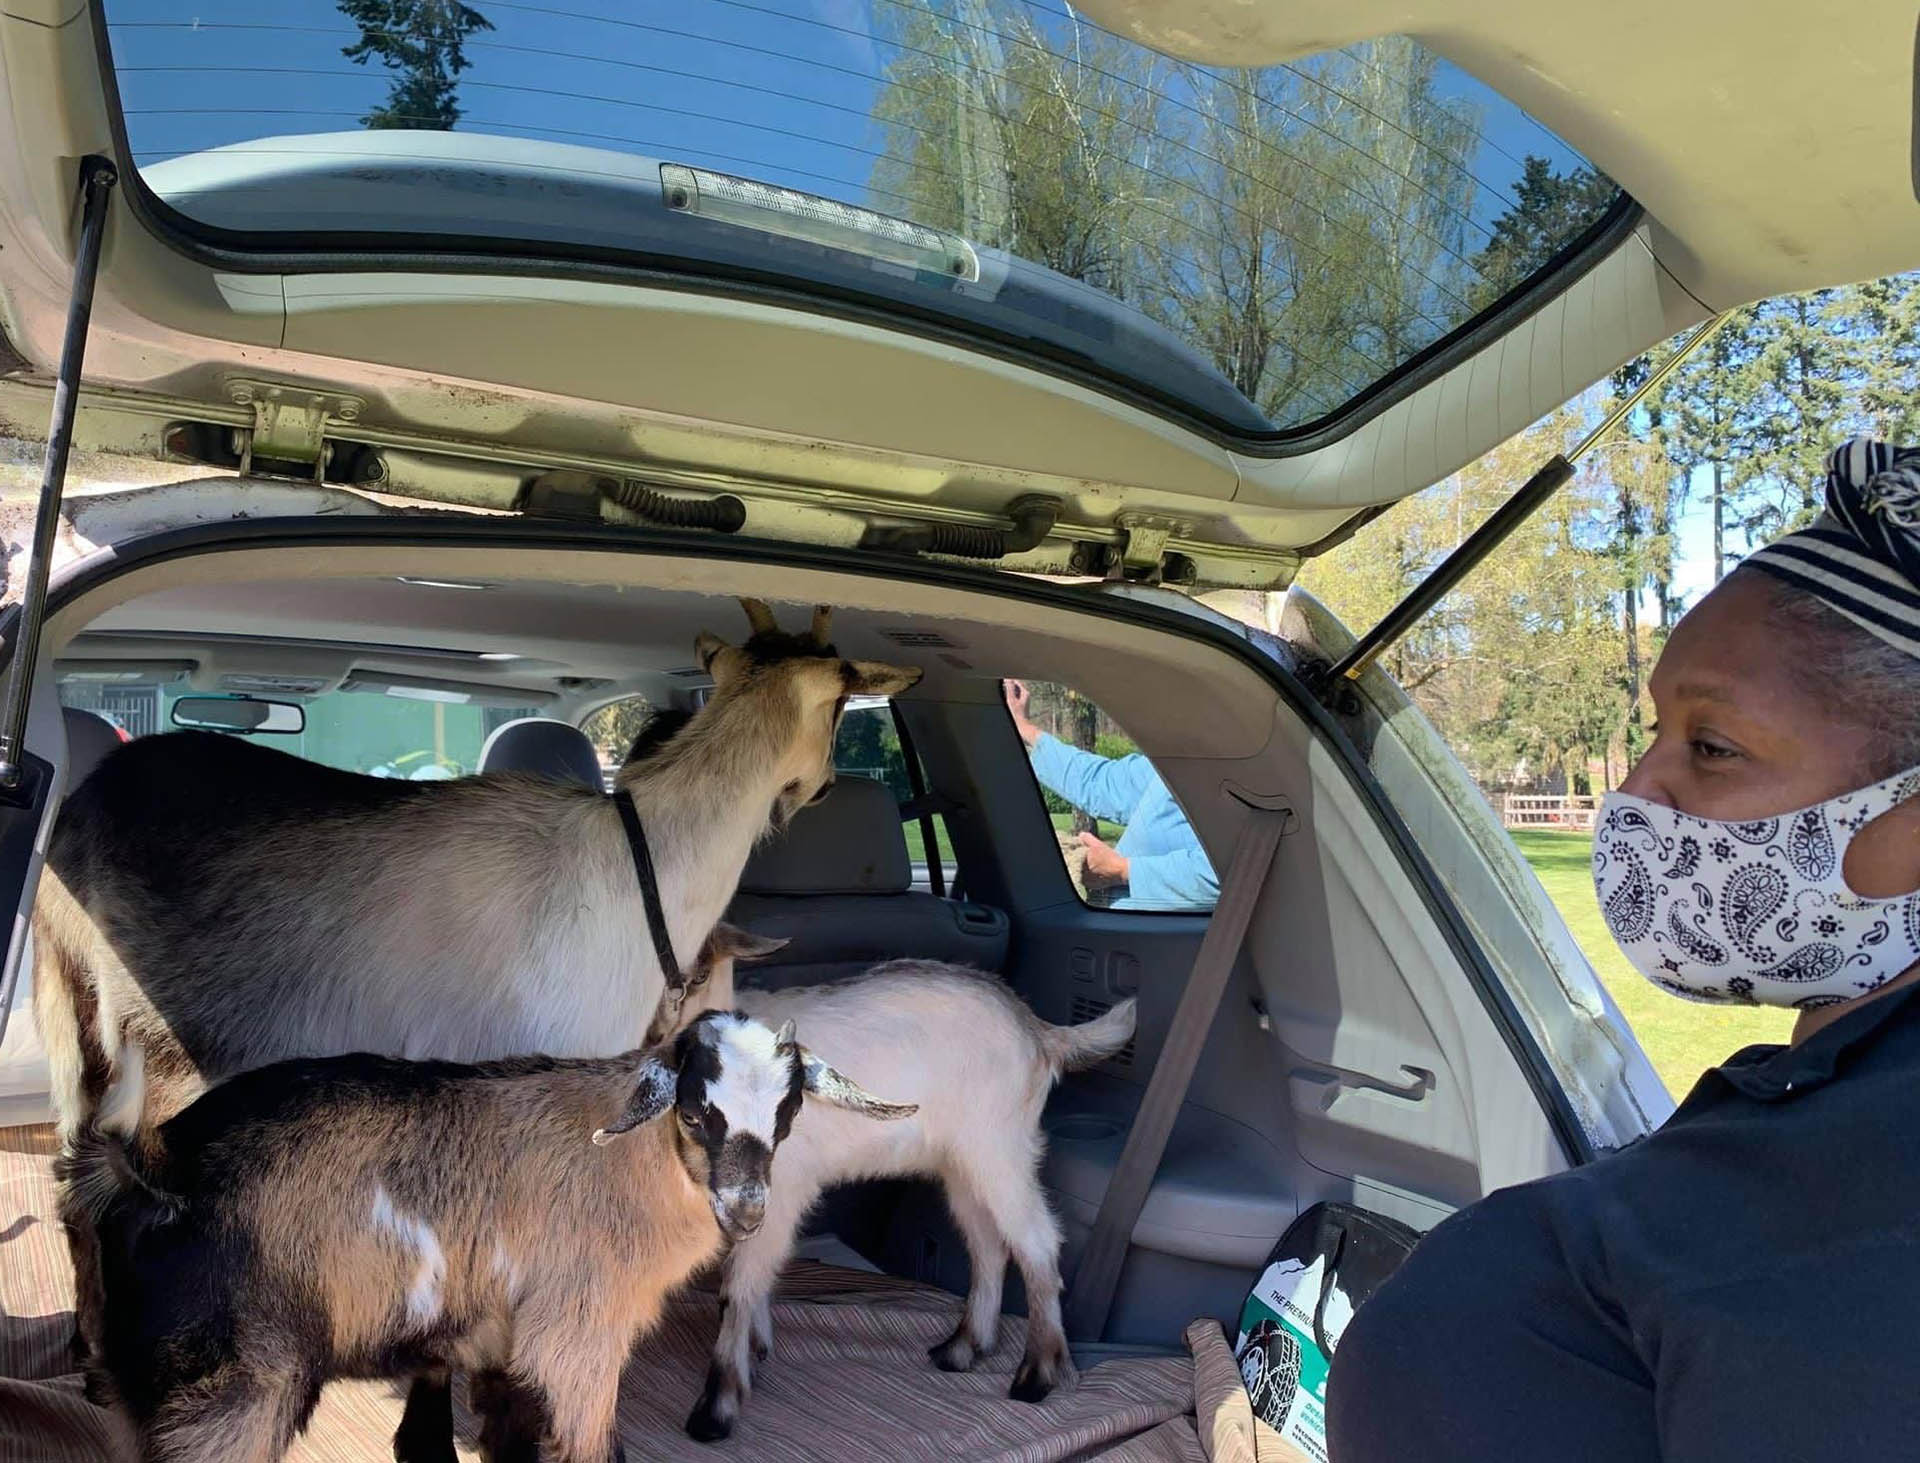 A female farmer stands behind the open hatch of her SUV vehicle with three goats inside.